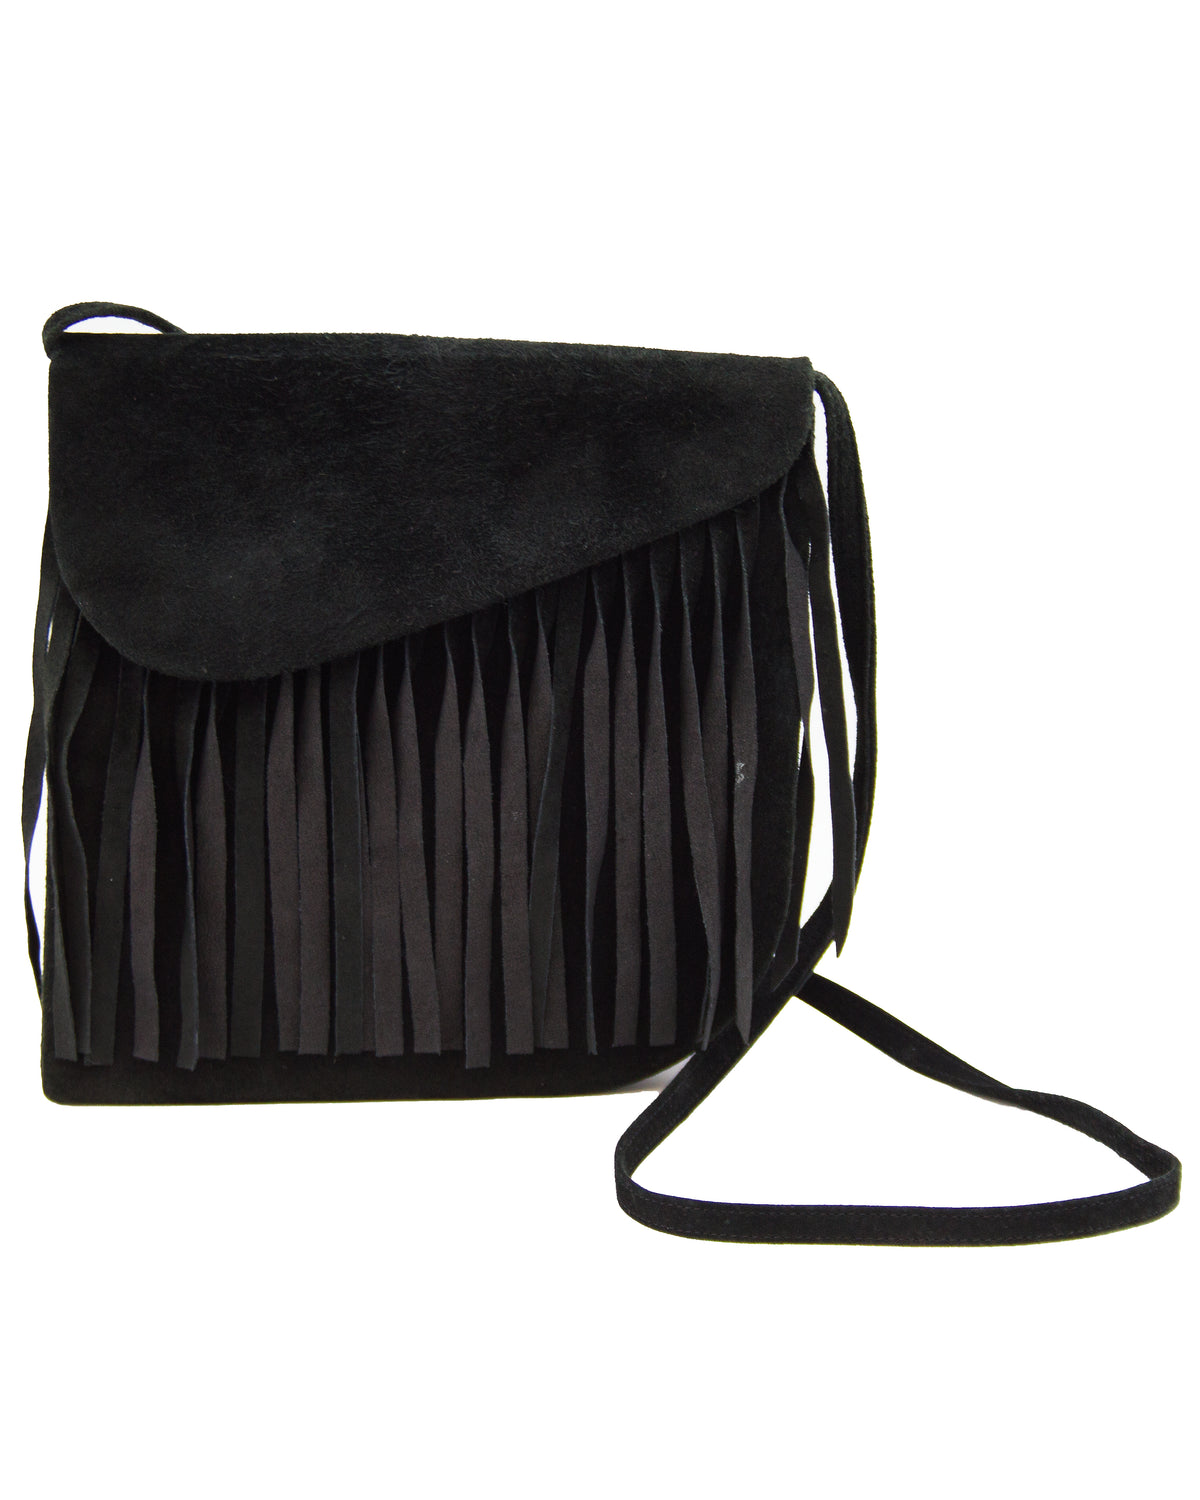 ULA BAG IN BLACK LEATHER – areiasleather.com